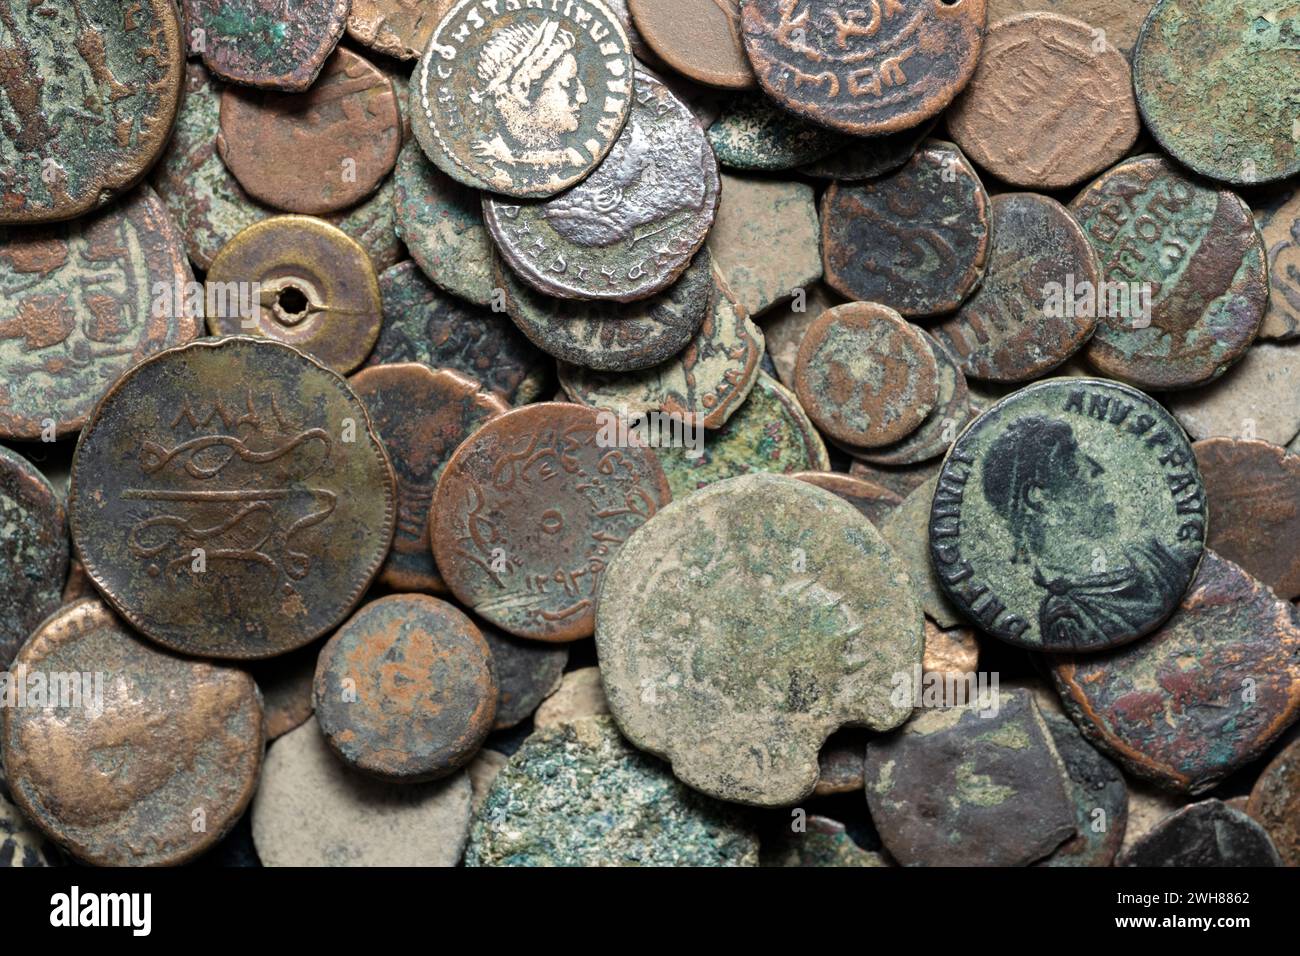 A collection of antique coins, relics, historical artifacts of the past from bygone eras. Stock Photo